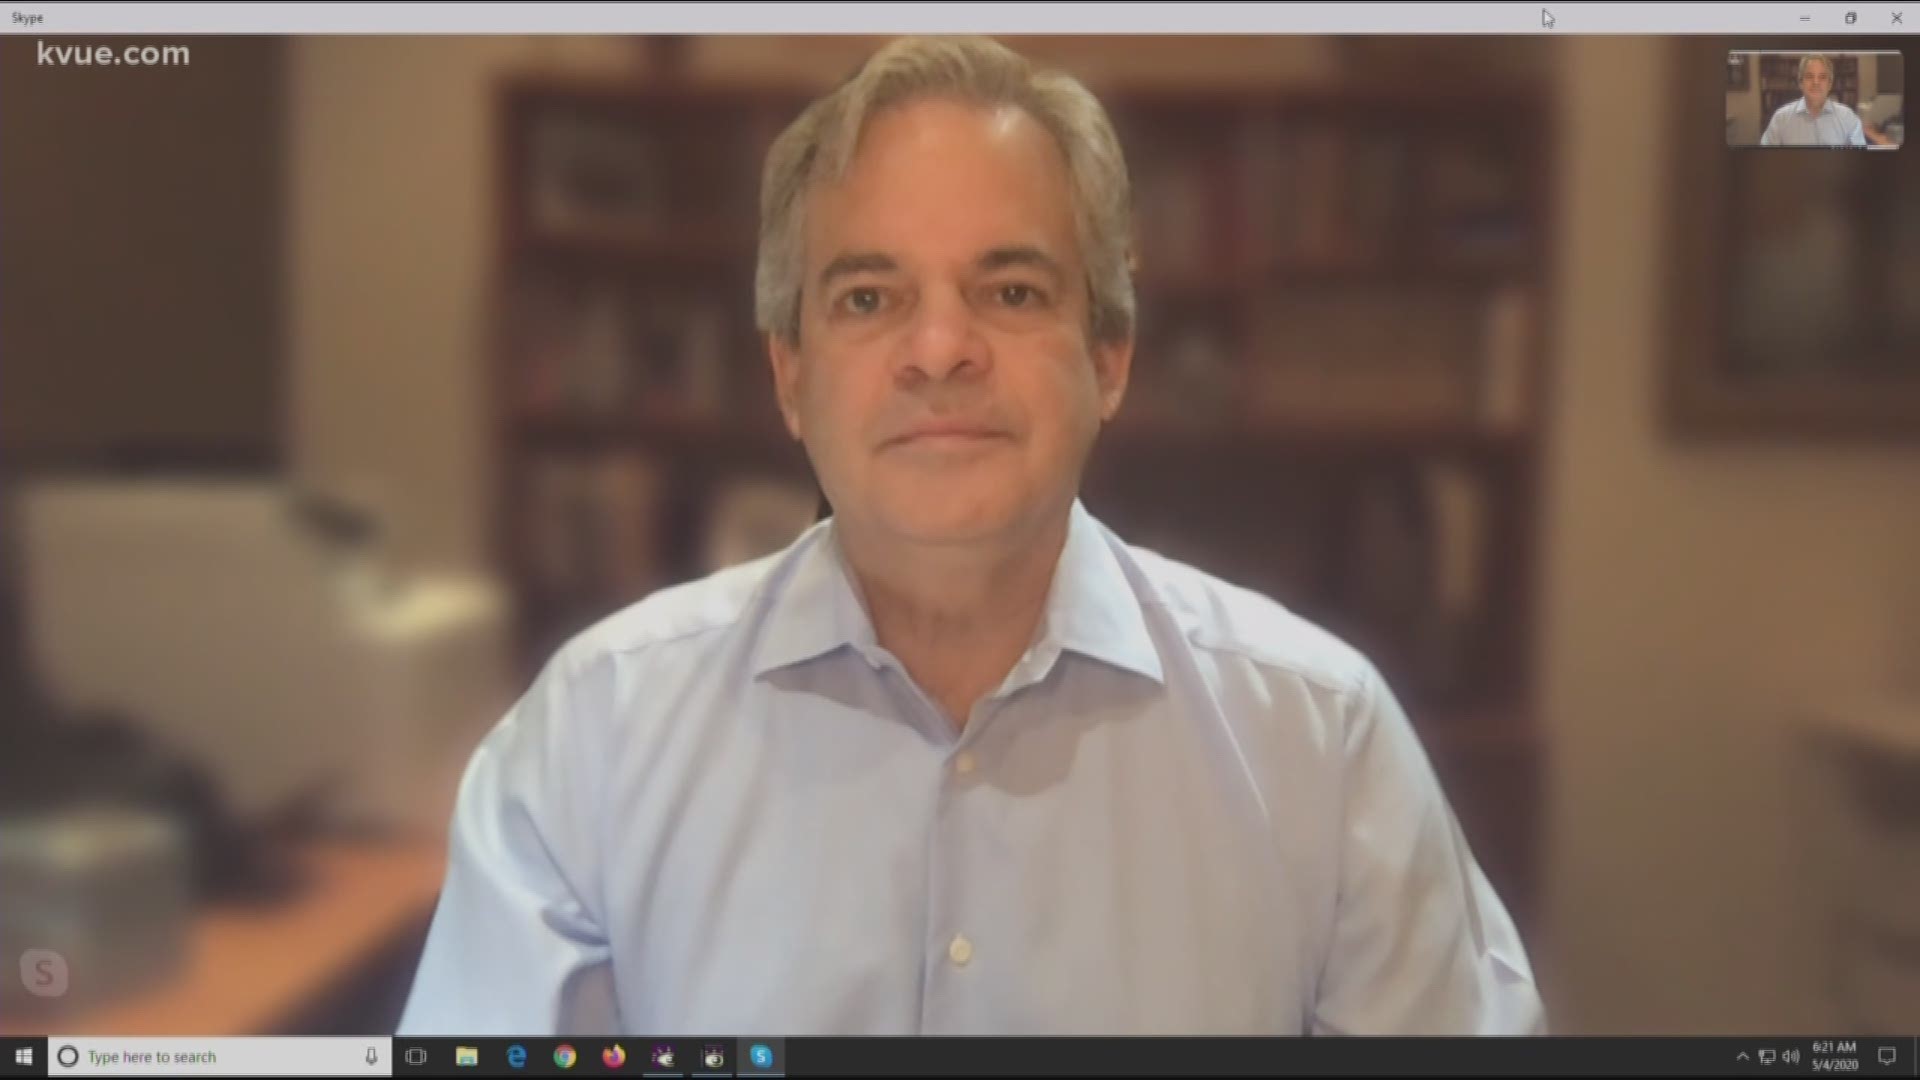 Mayor Steve Adler joined KVUE to give the latest COVID-19 updates.